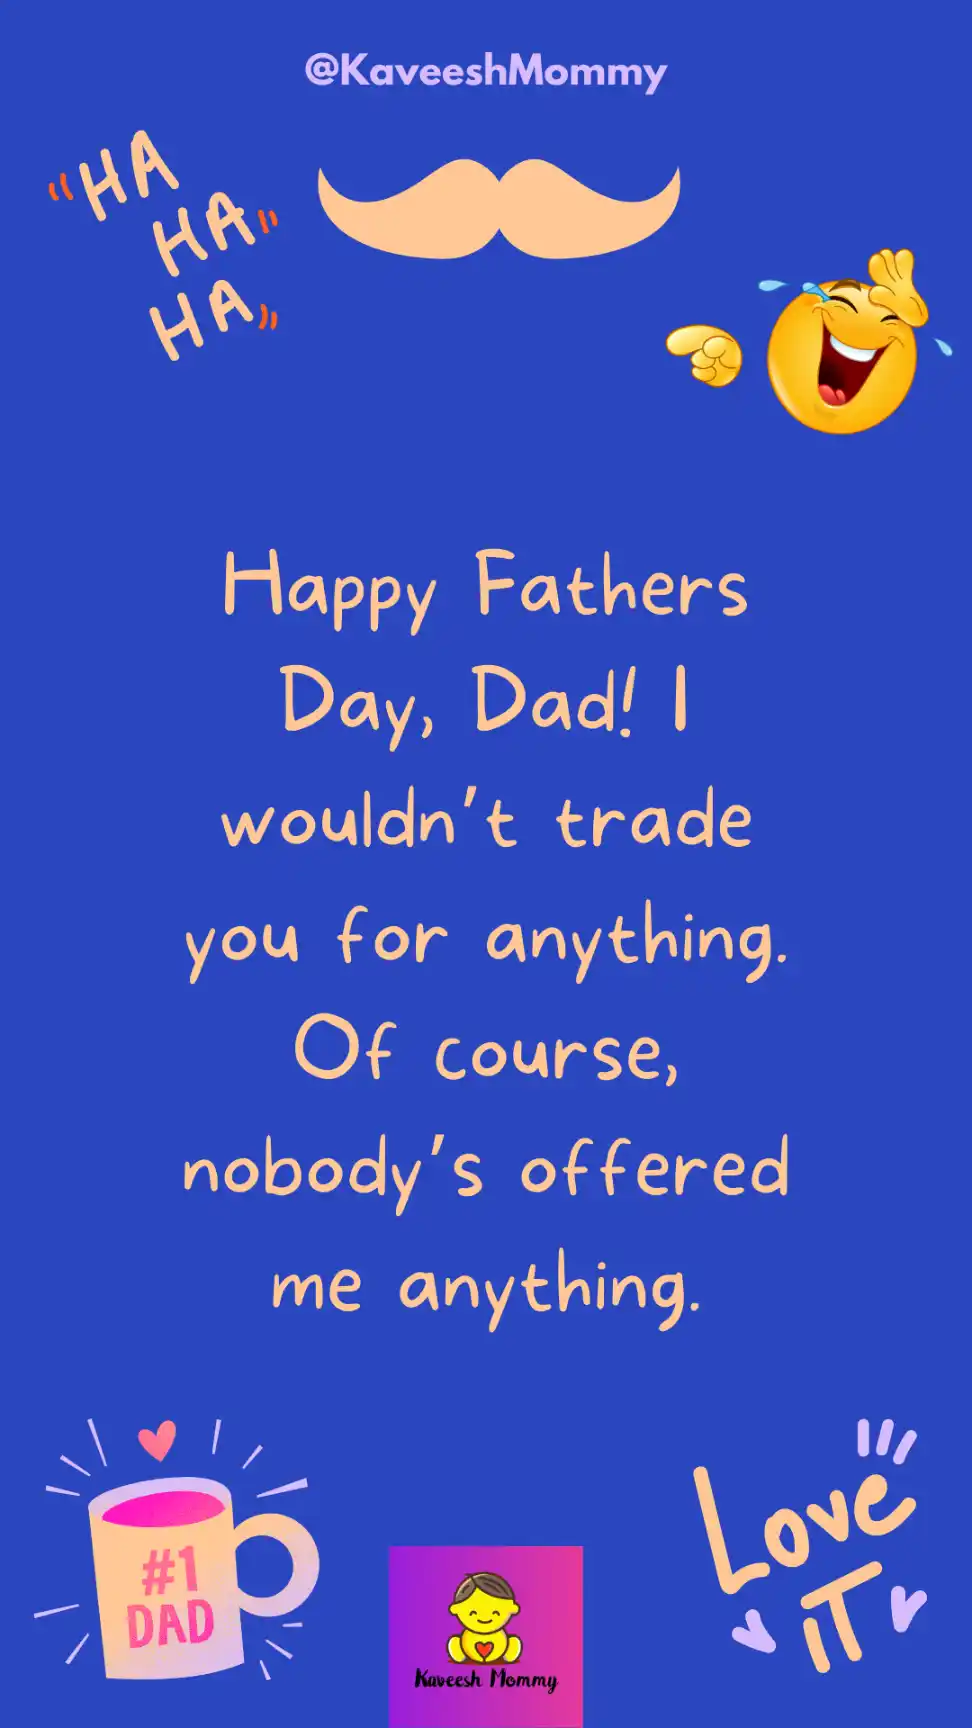 -kaveesh mommy-jokes funny father's day quotes